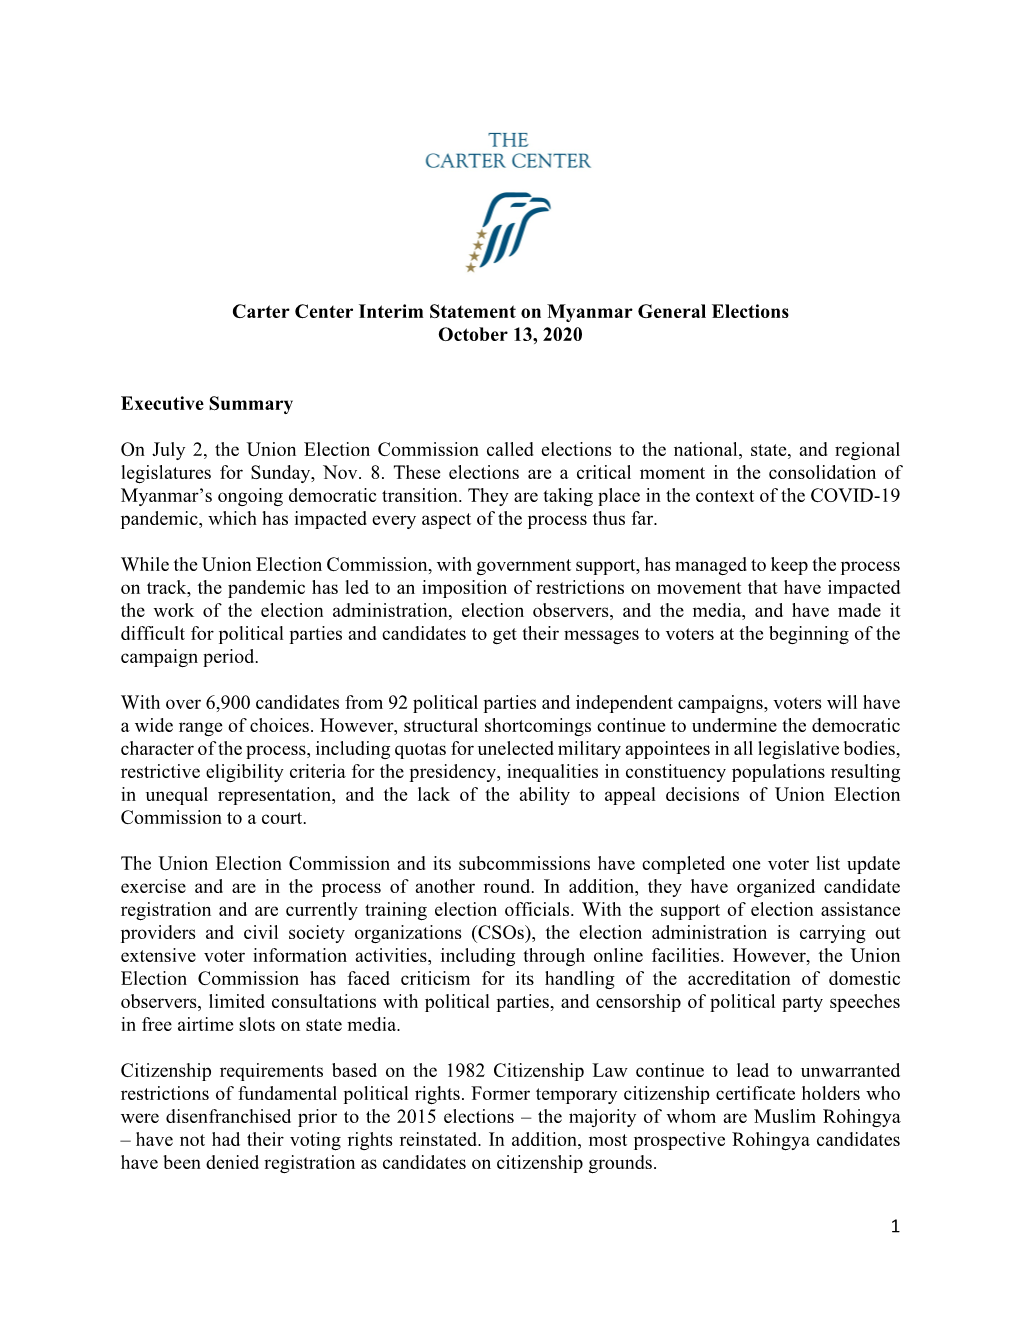 1 Carter Center Interim Statement on Myanmar General Elections October 13, 2020 Executive Summary on July 2, the Union Election